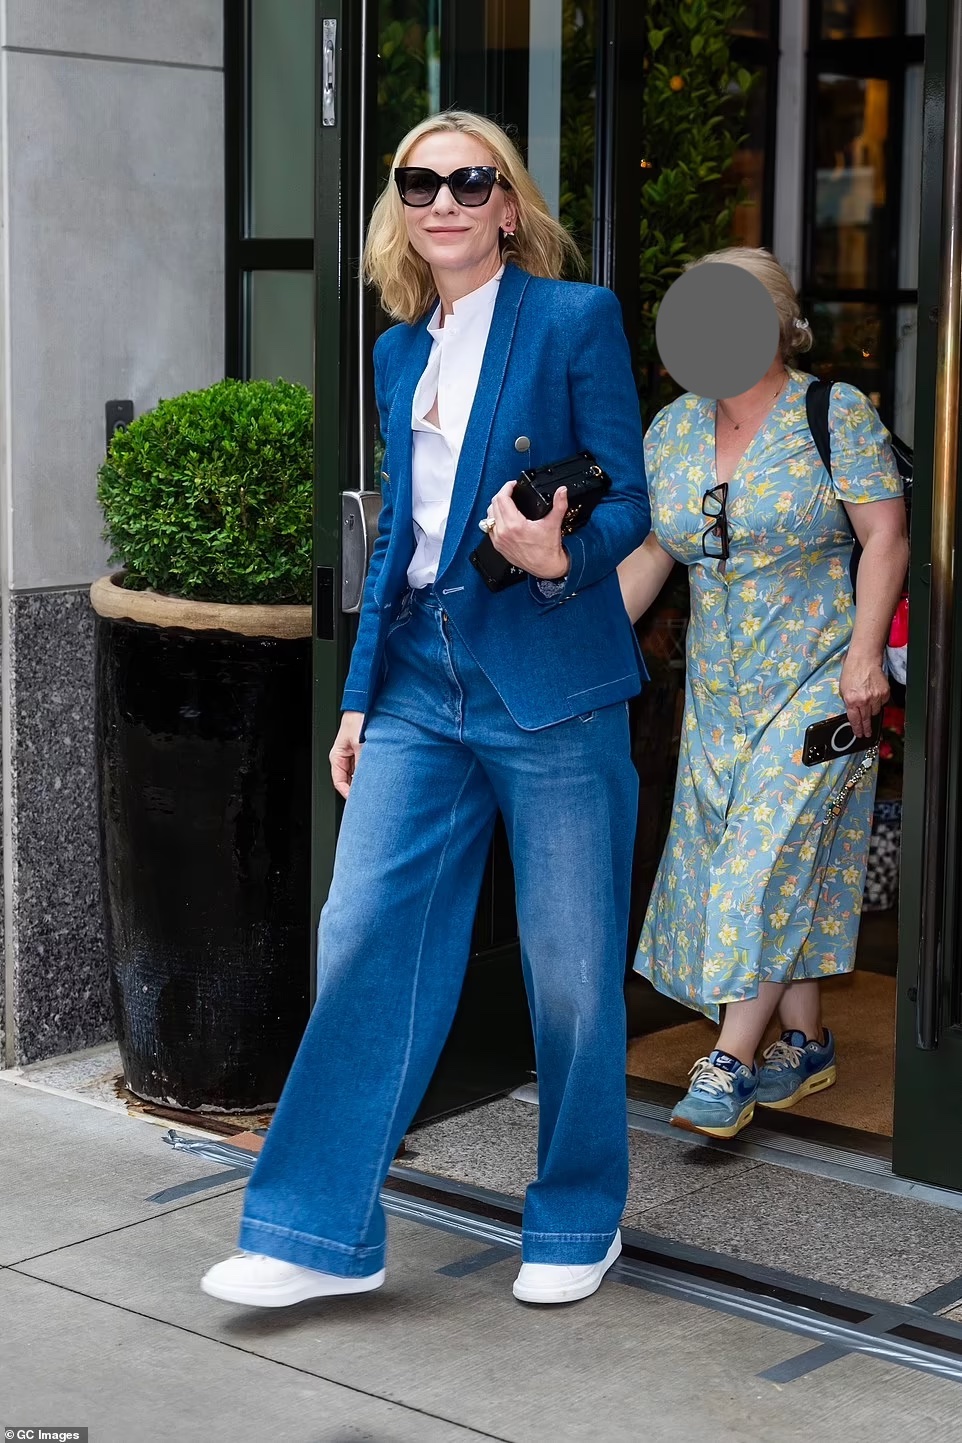 Cate Blanchett was spotted in Midtown Manhattan on June 15, 2023